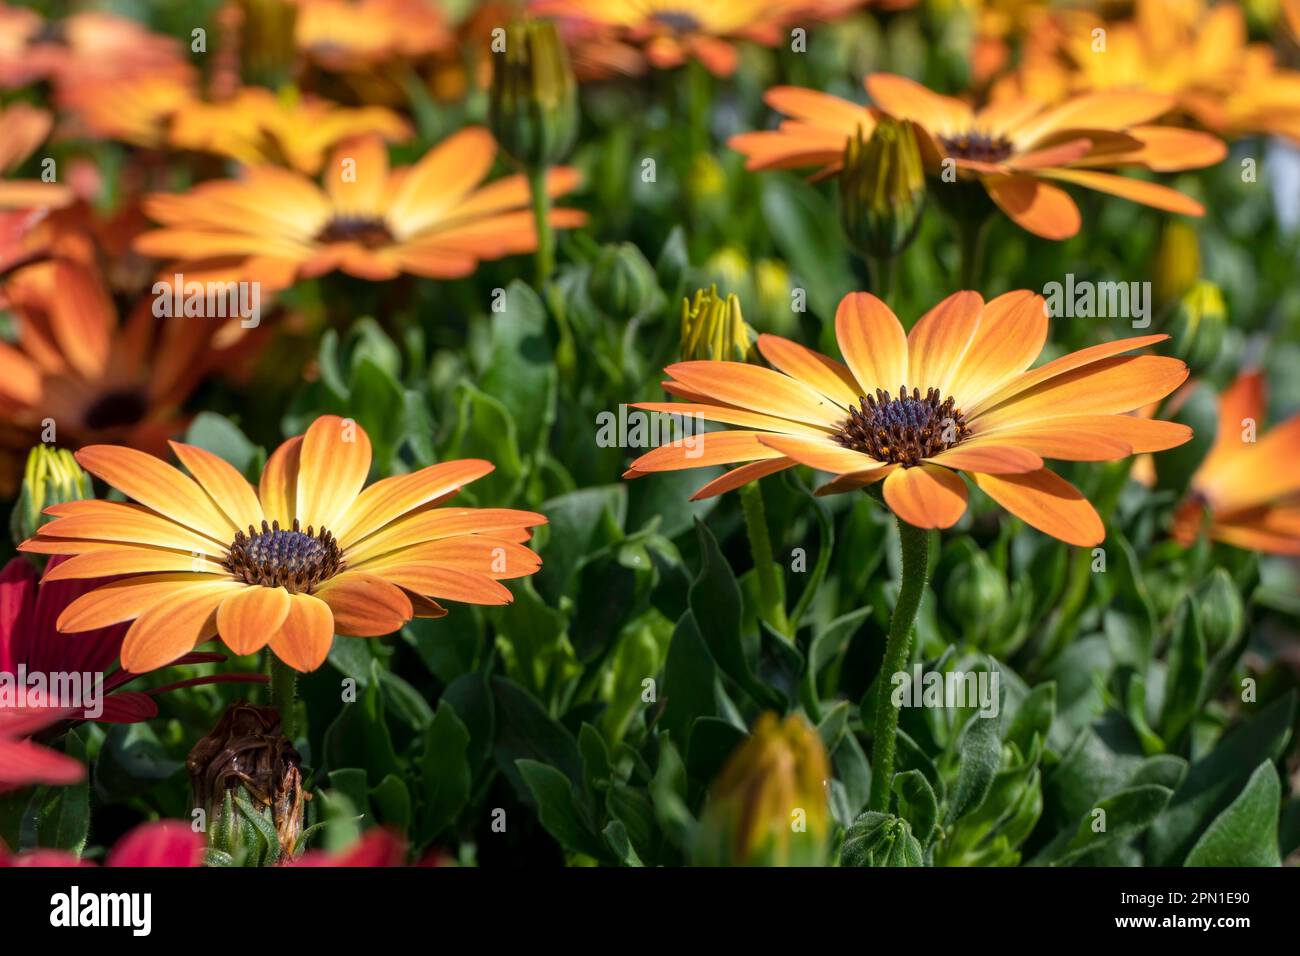 Flowers of yellow garden African daisies close up on a blurred background. Stock Photo